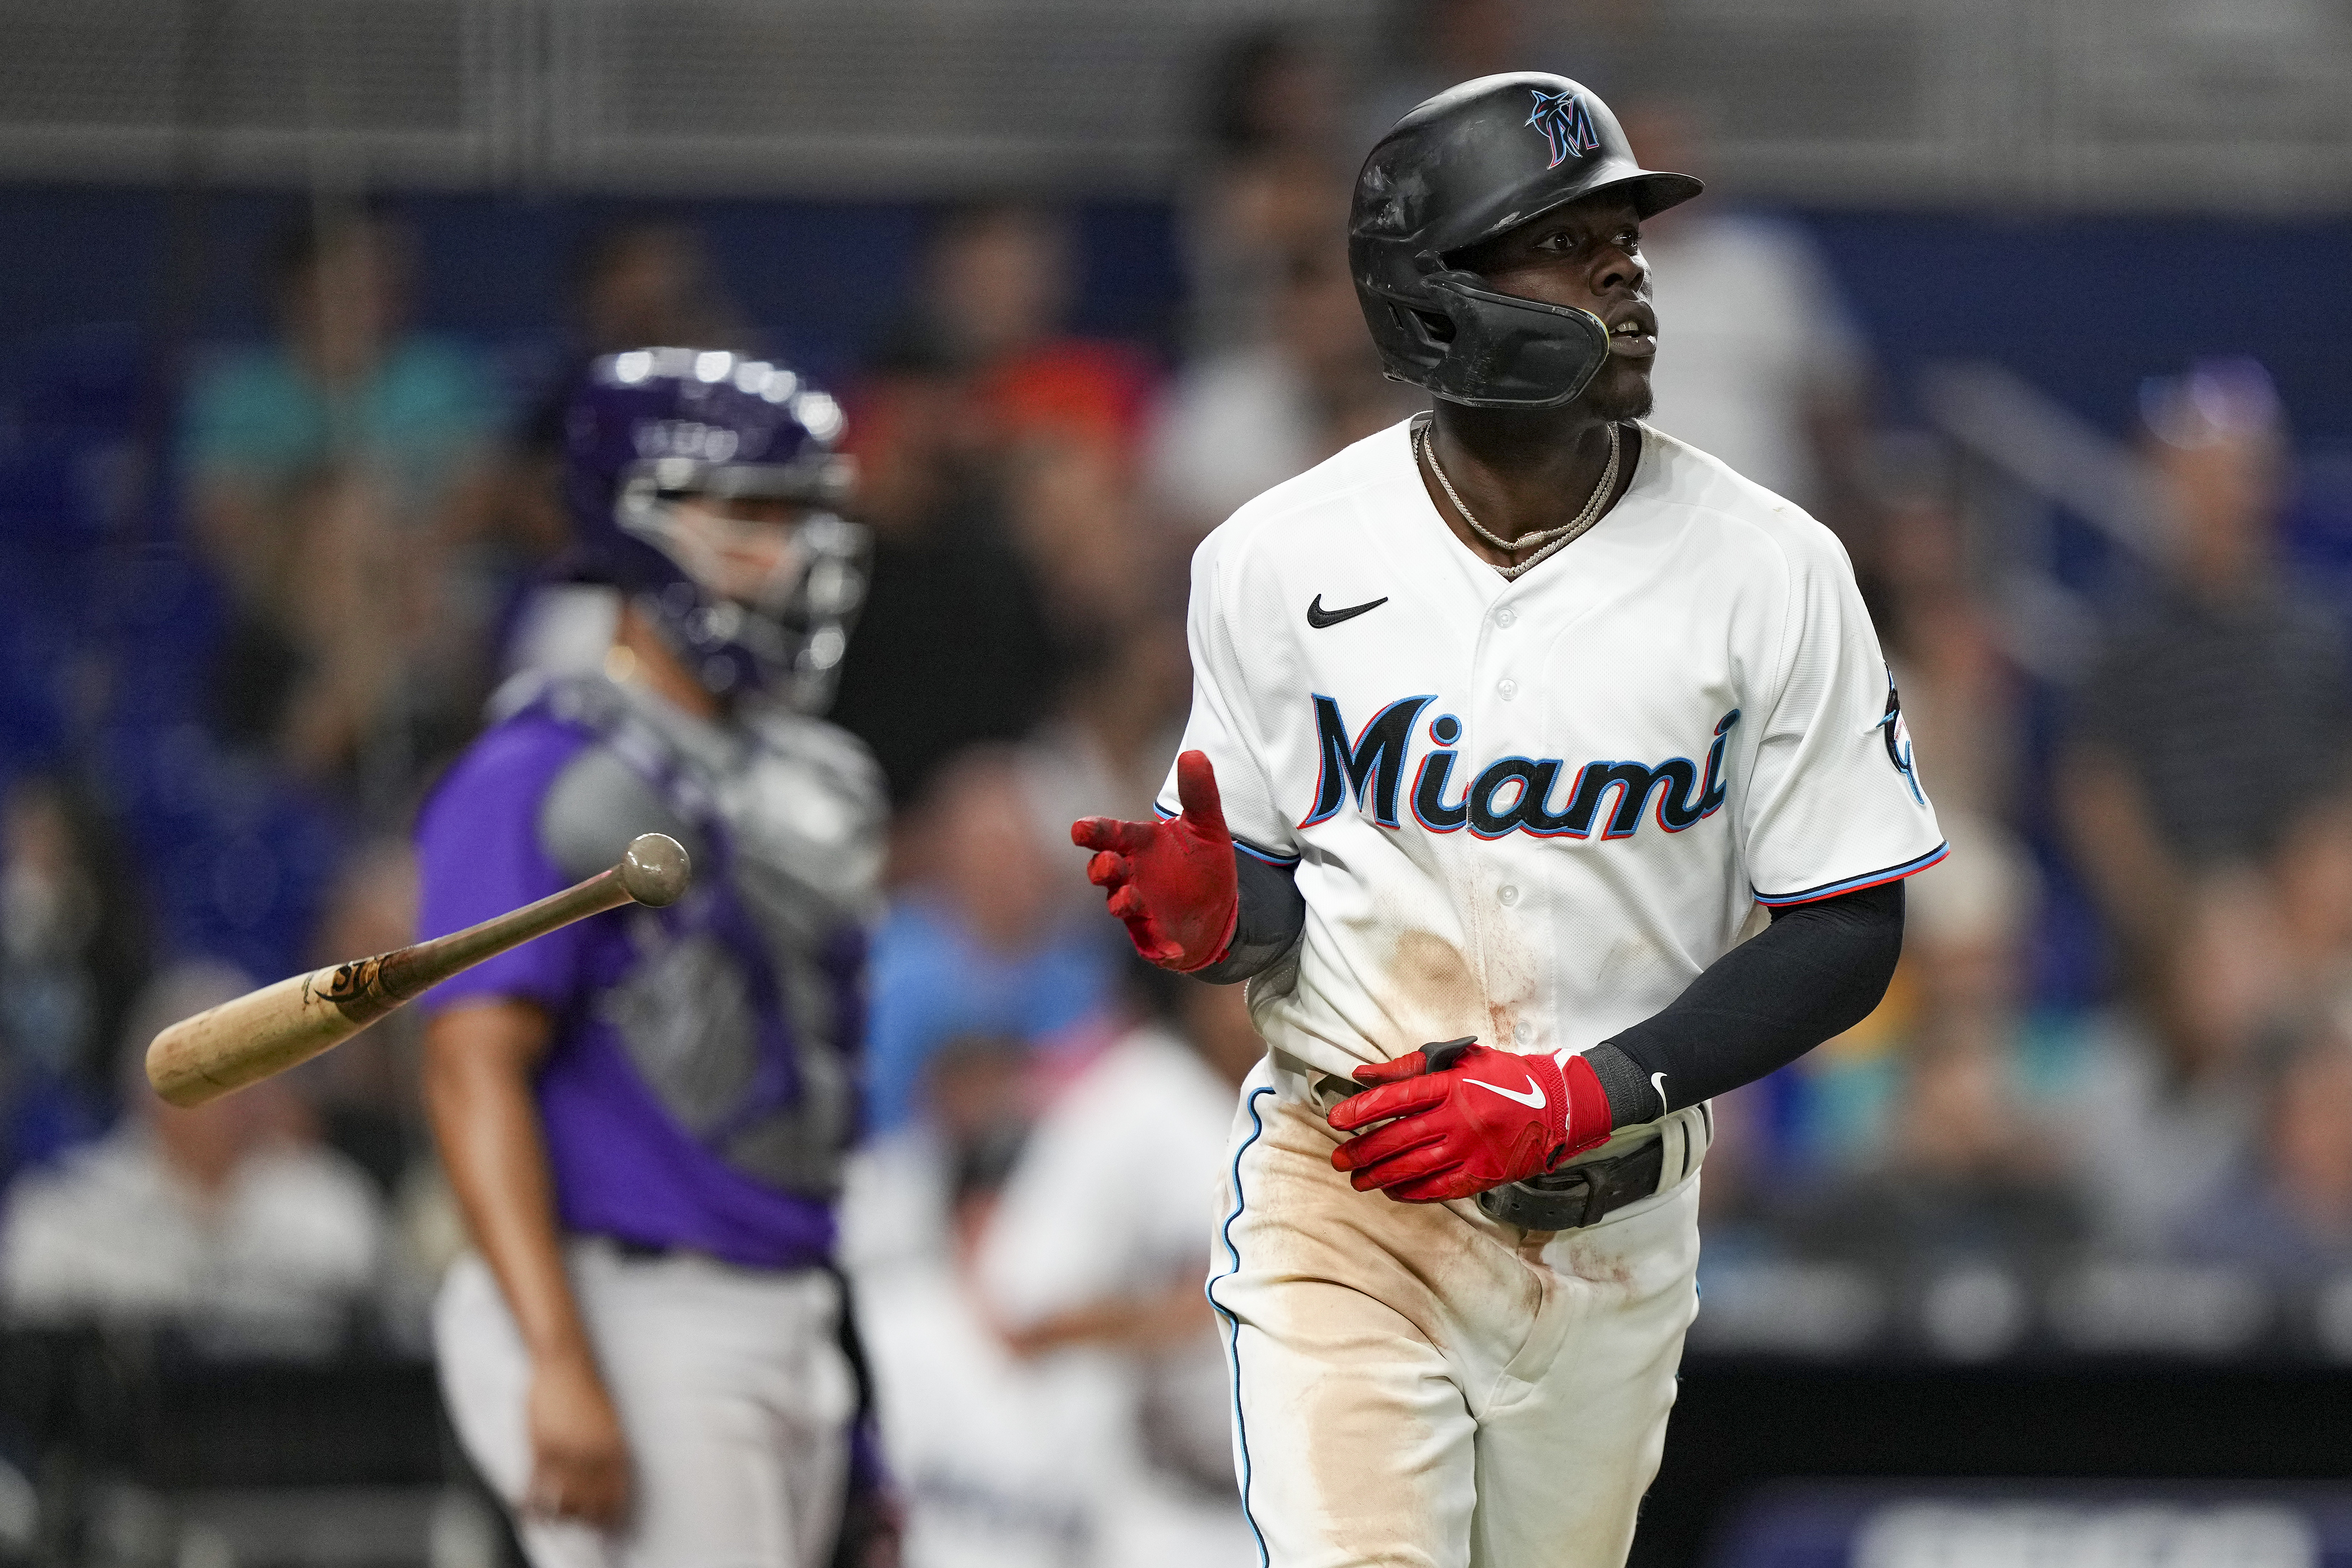 Jazz Chisholm Jr. #2 of the Miami Marlins hits a home run during the seventh inning against the Colorado Rockies at loanDepot park on June 22, 2022 in Miami, Florida.